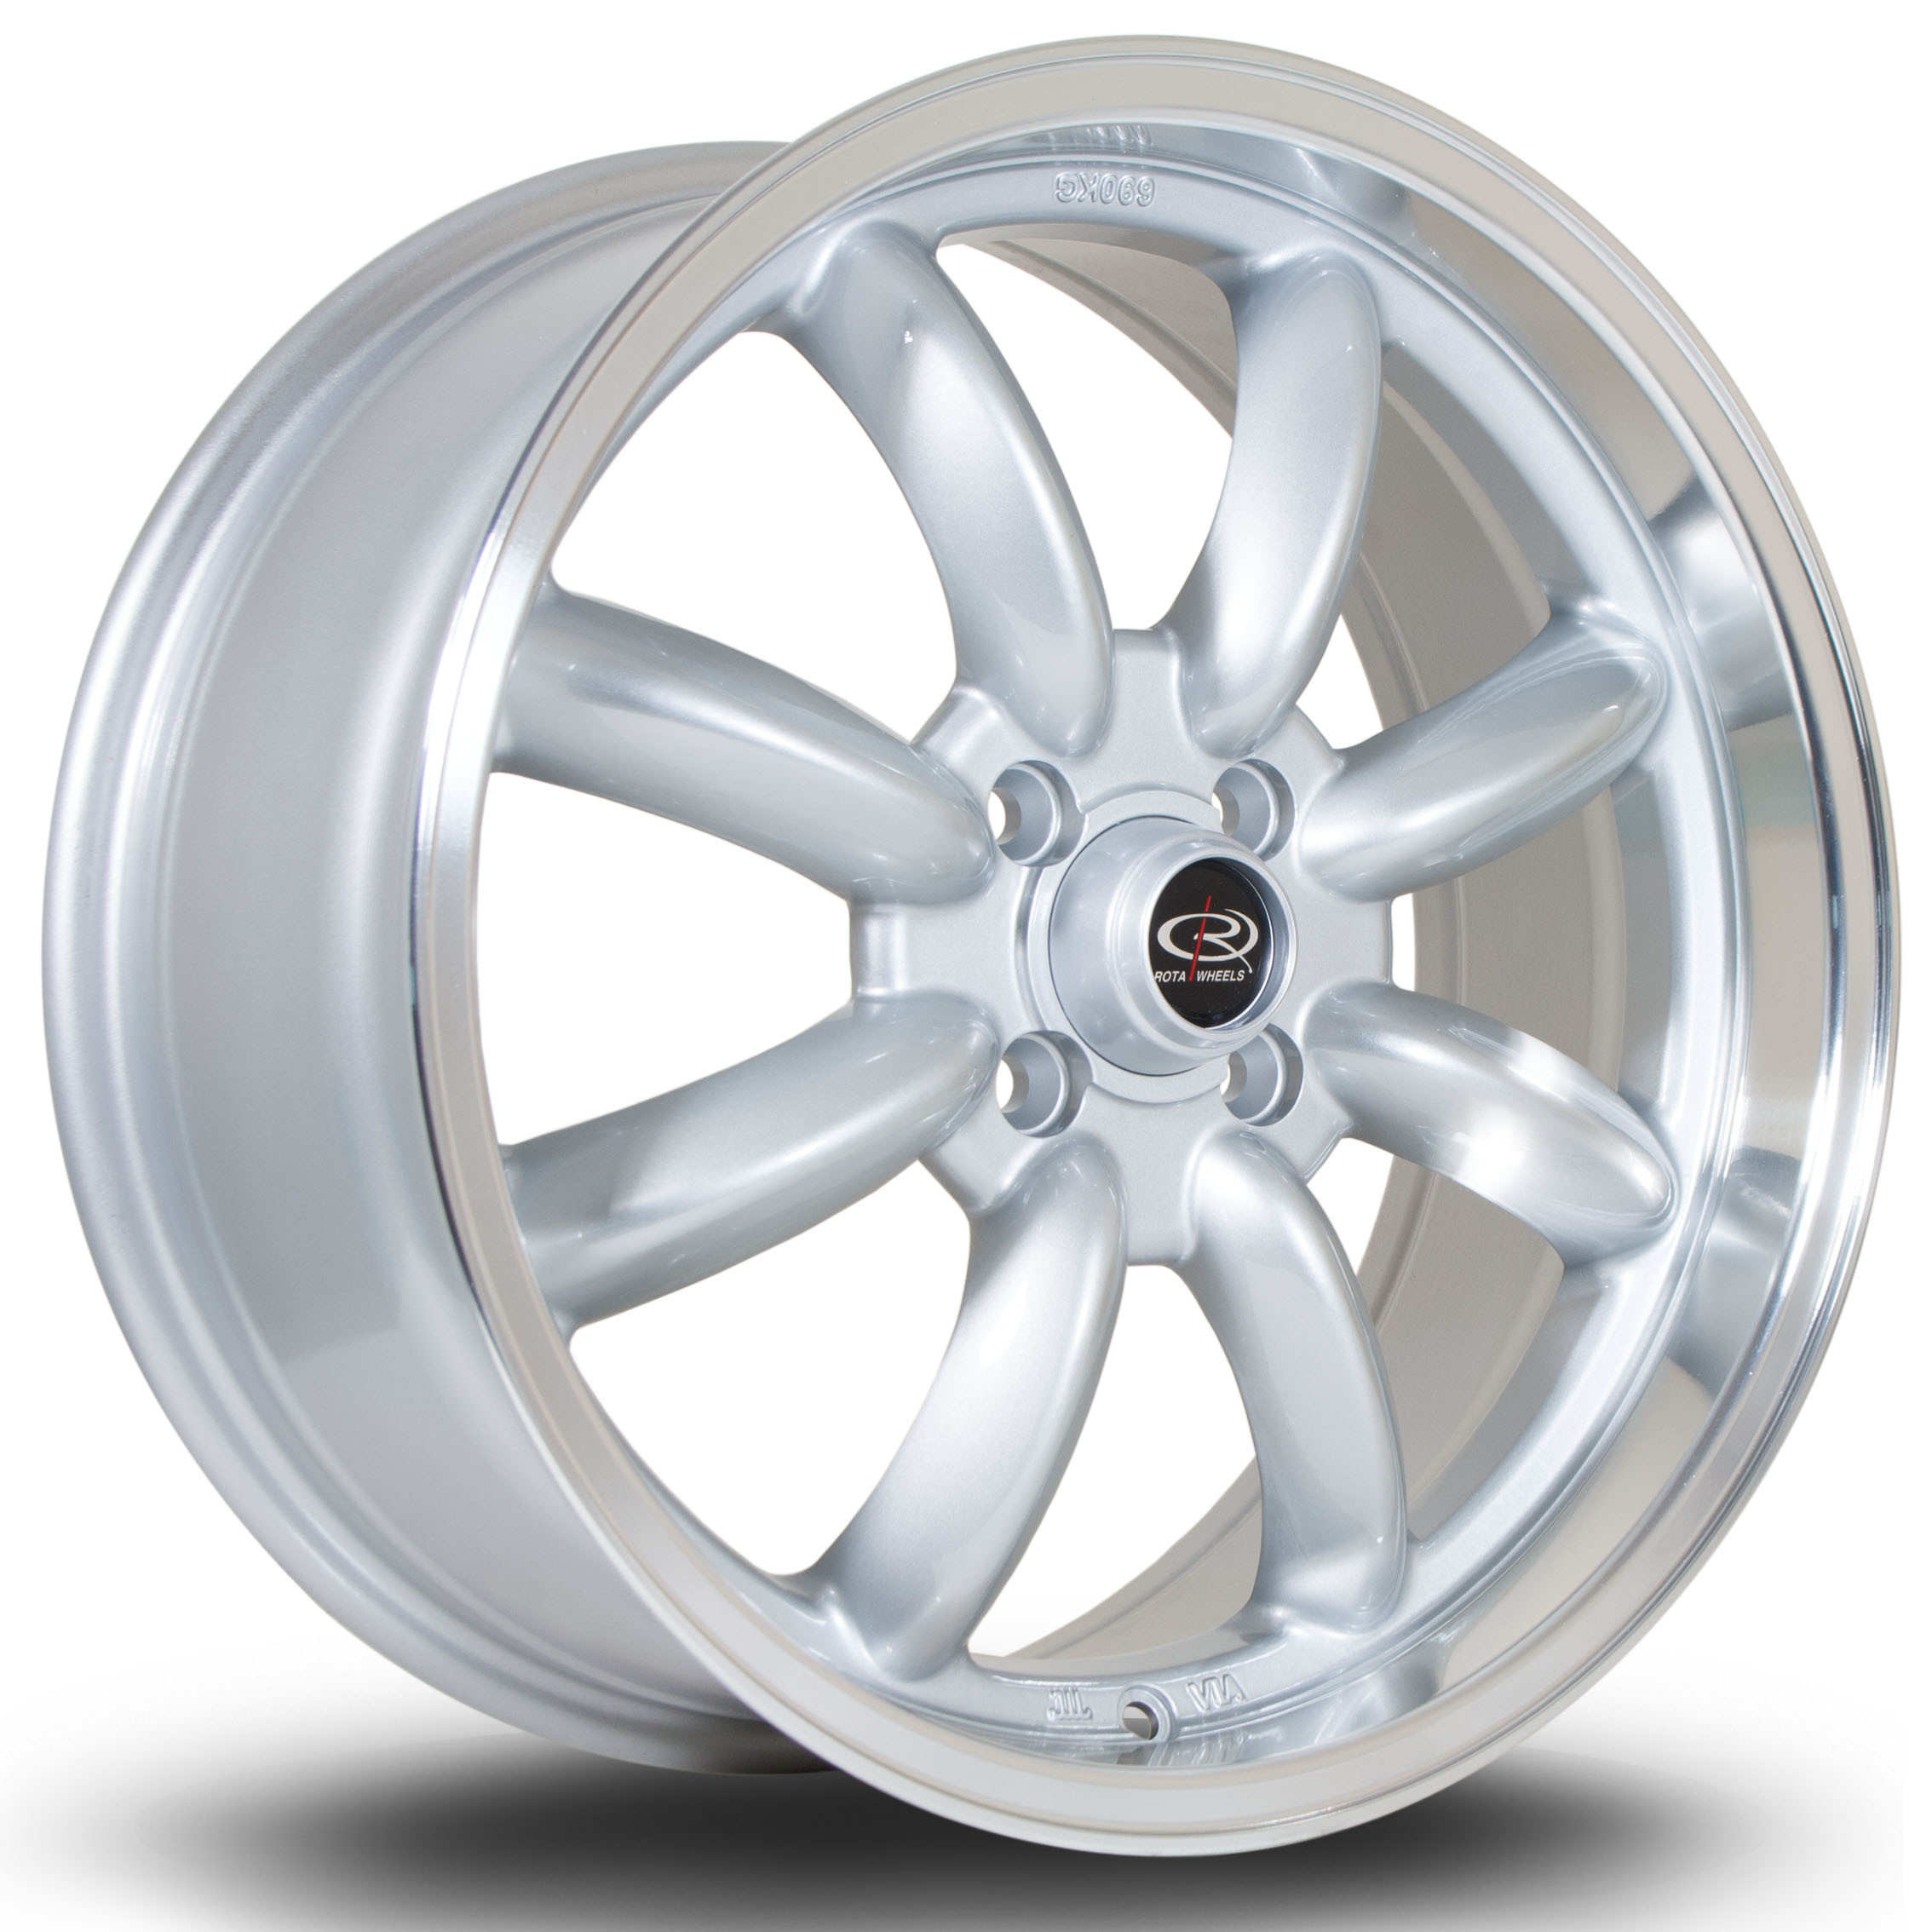 RB 17x7.5 4x100 ET45 Silver with Polished Lip - Rota Wheels